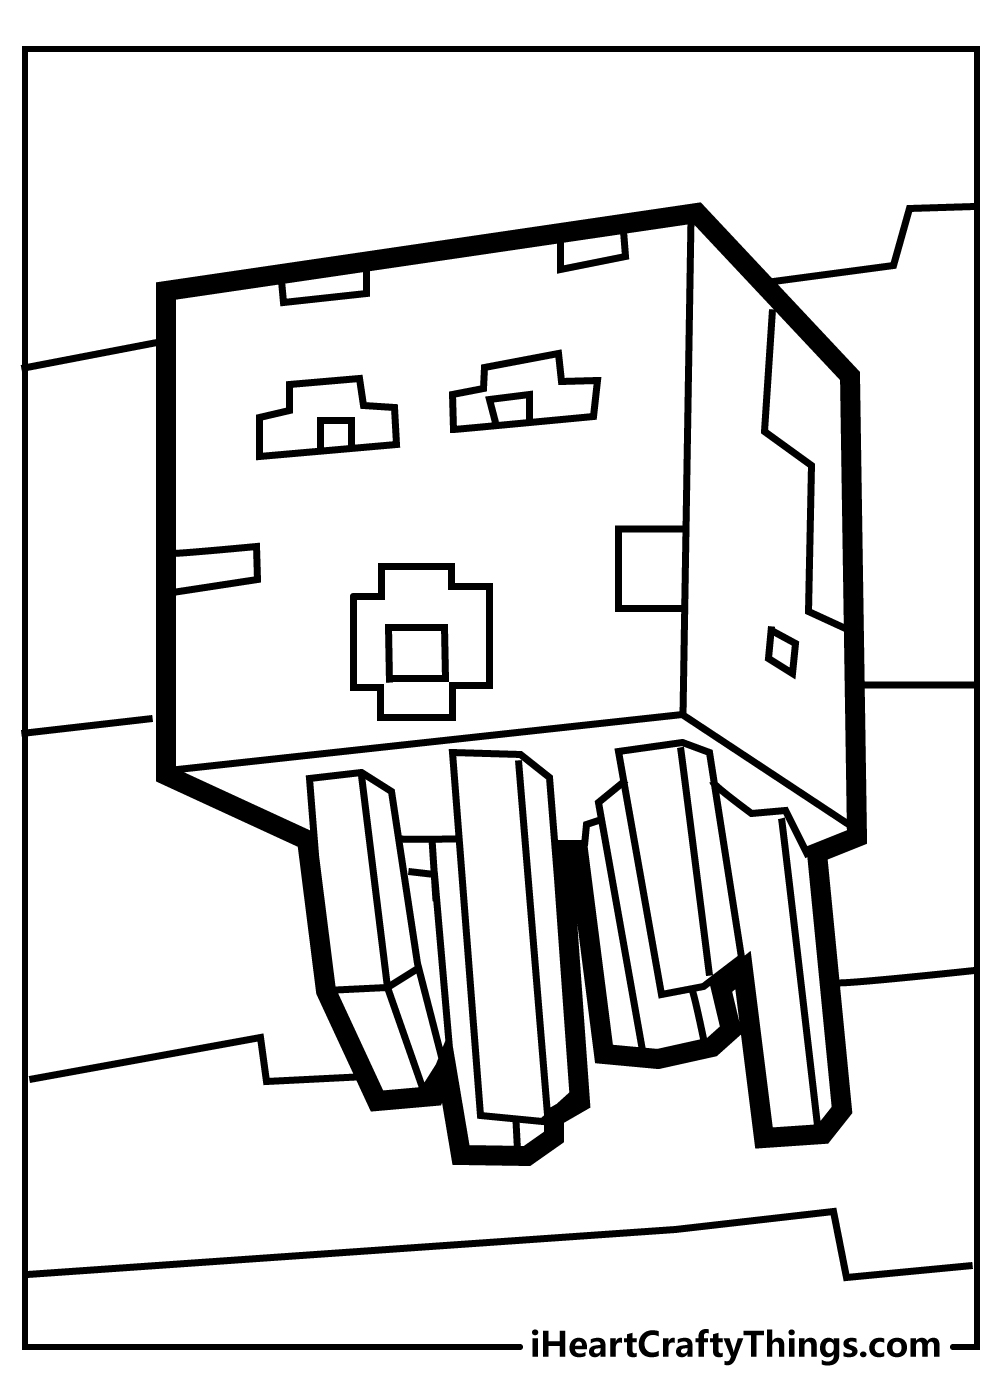 Minecraft Coloring Page For Print Free Printable Coloring Pages Sexiz Pix